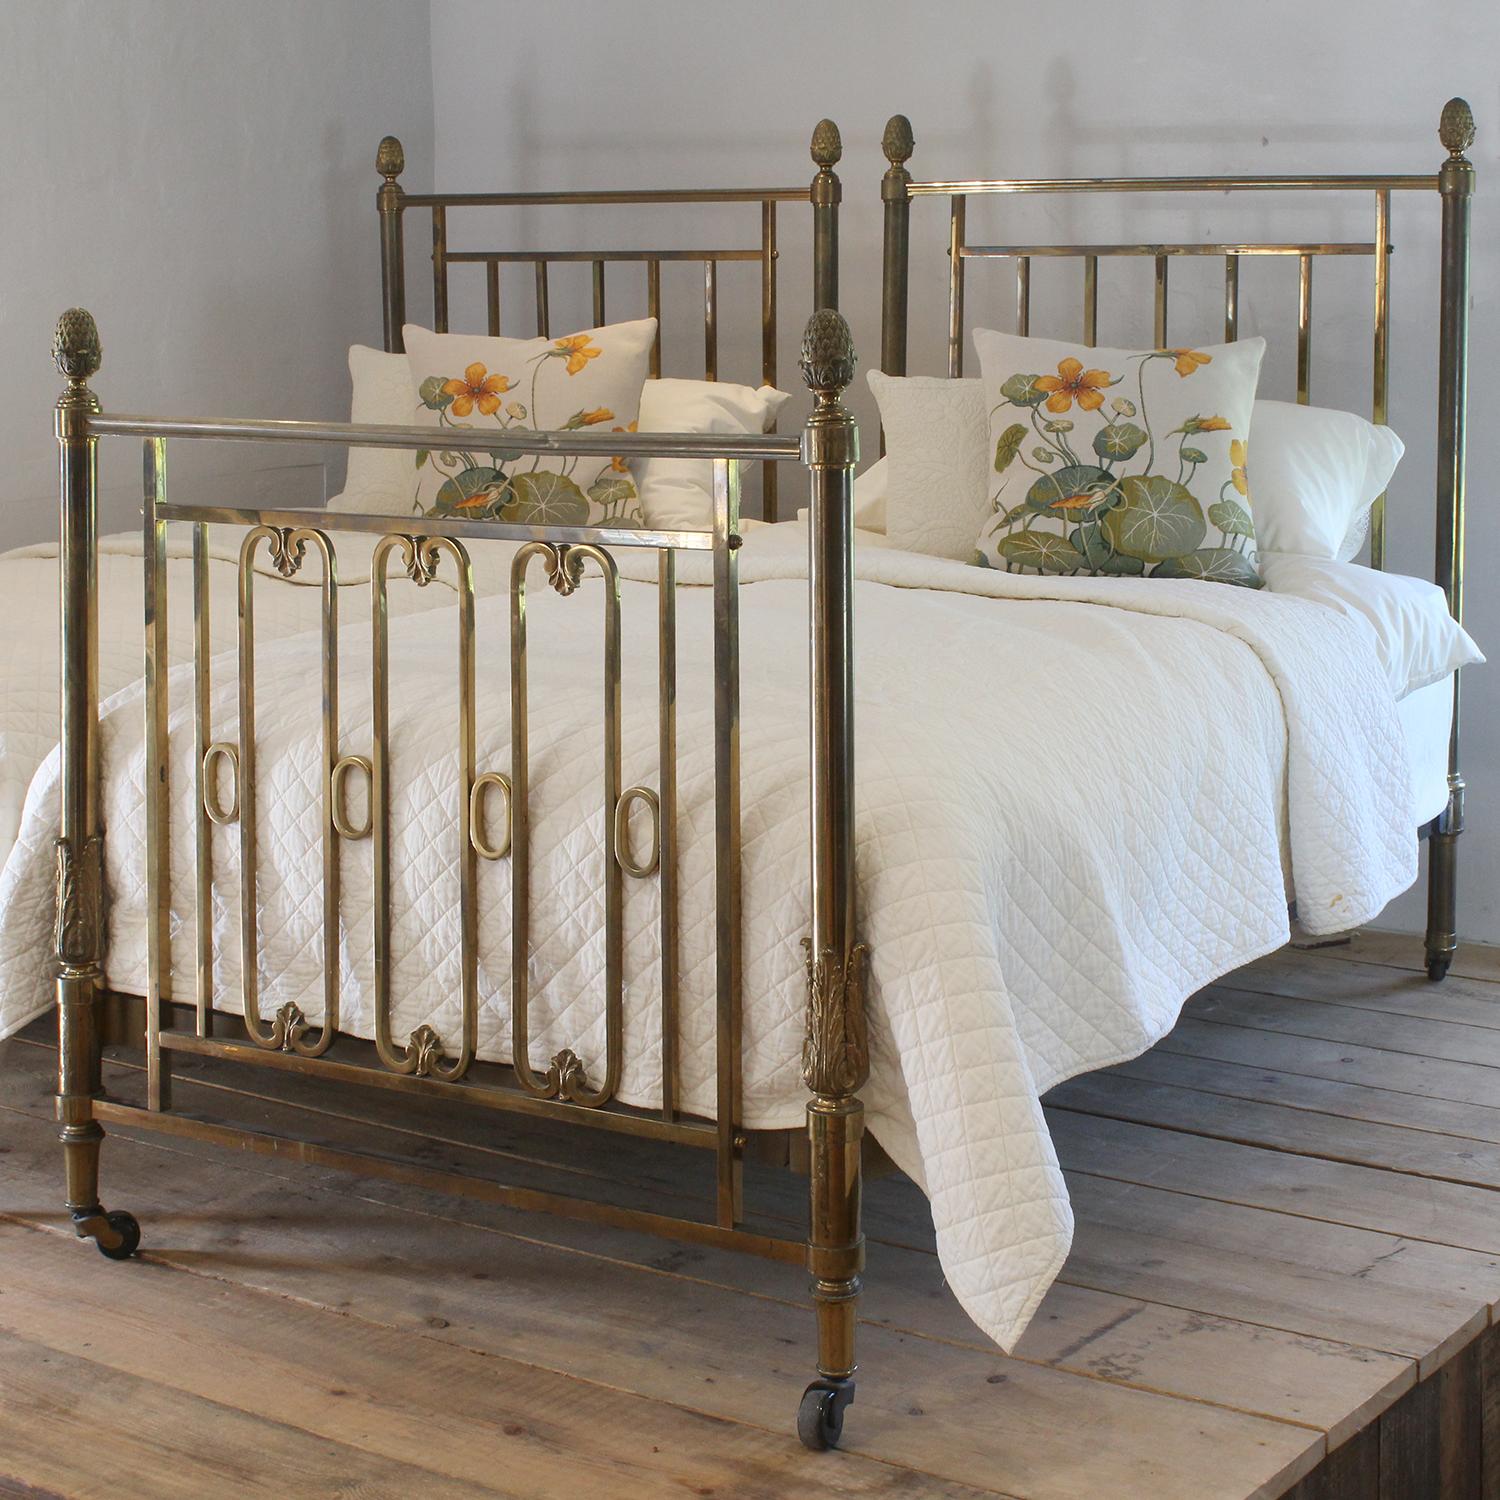 A magnificent matching pair of all brass Edwardian beds in the classical style with cast acanthus leaf detailing and pineapple style finials. The superb golden patina of the brass has been acquired over more than 100 years.

Each bed has a brass